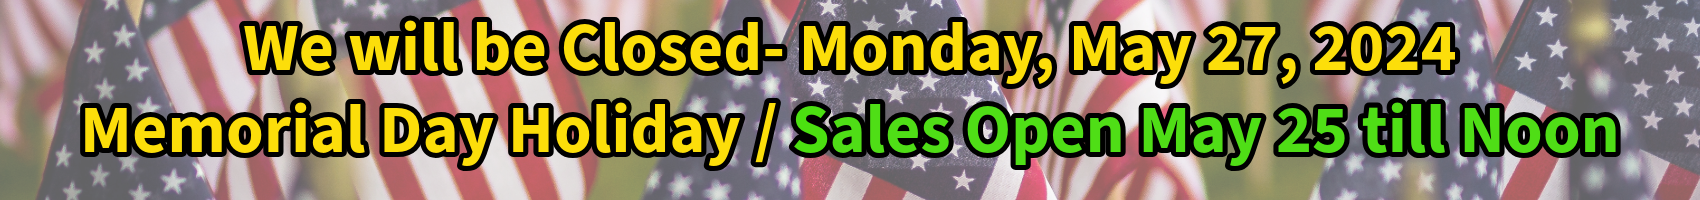 Memorial day holiday hours banner May 2024